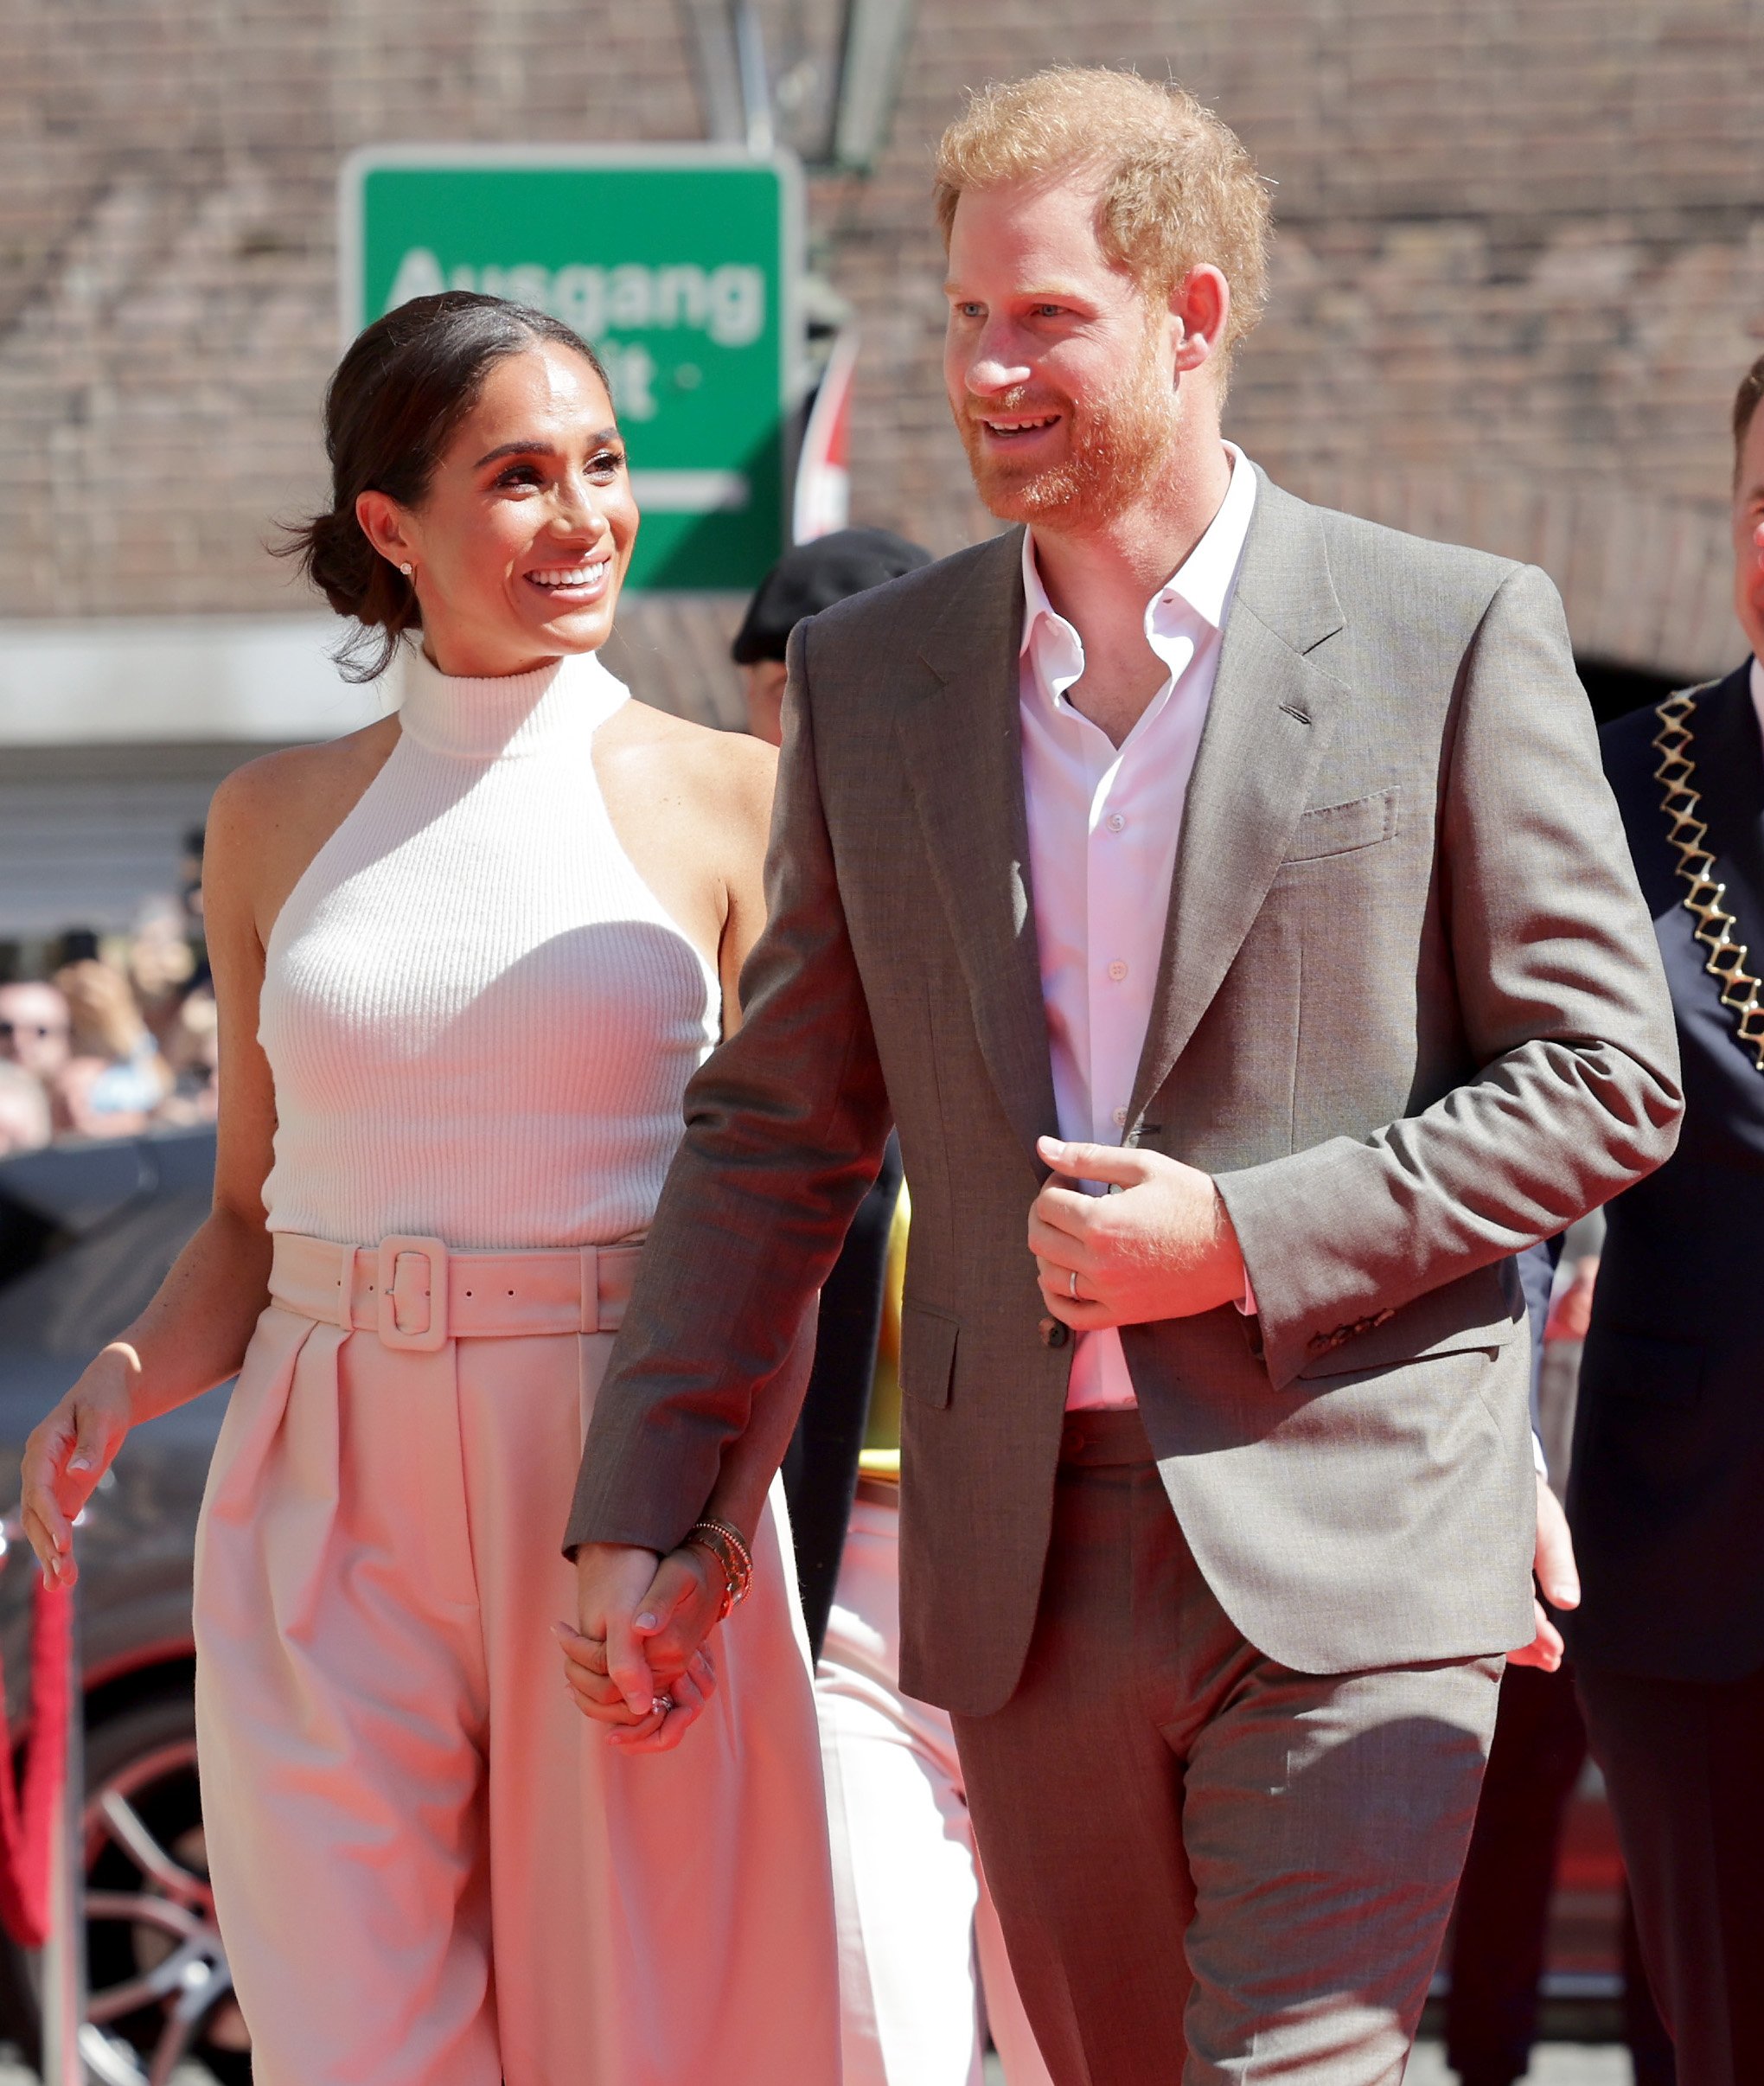 Prince Harry, Duke of Sussex and Meghan, Duchess of Sussex arrive at the town hall during the Invictus Games Dusseldorf 2023 - One Year To Go events, on September 06, 2022 in Dusseldorf, Germany. | Source: Getty Images